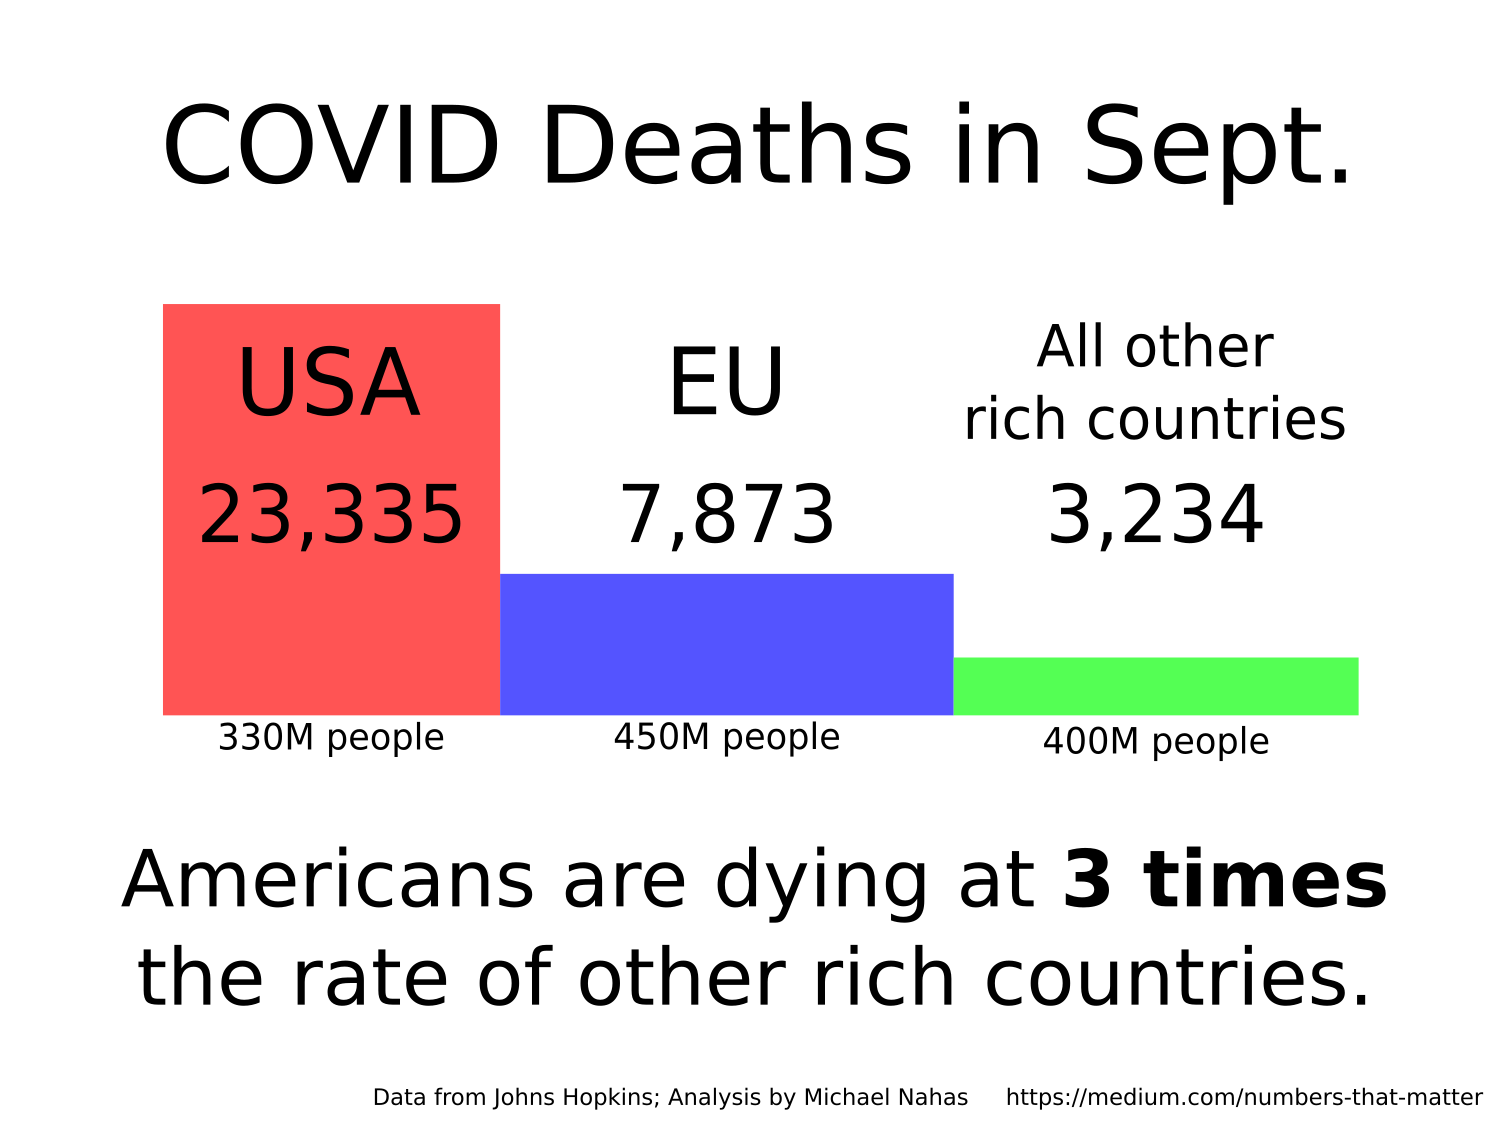 A vertical bar chart of covid deaths with 3 bars: the USA, EU, and all other rich countries. The USA's 23,335 is much larger than the EU's 7,783 and all other countries' 3,234.